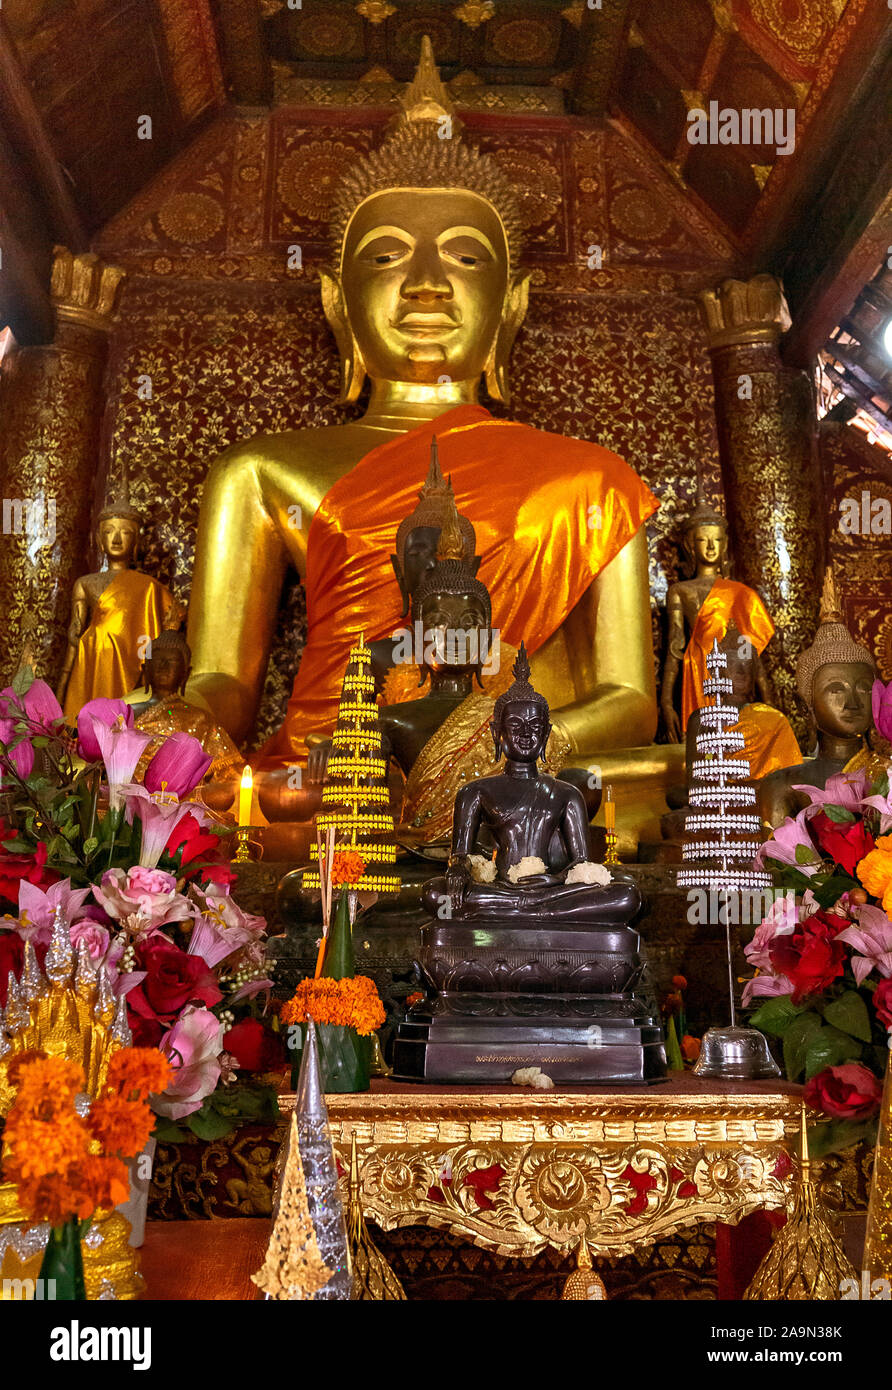 Buddha statues and floral offerings in a Temple or Wat in the picturesque UNESCO World Heritage Listed city of Luang Prabang in Laos. South East Asia. Stock Photo